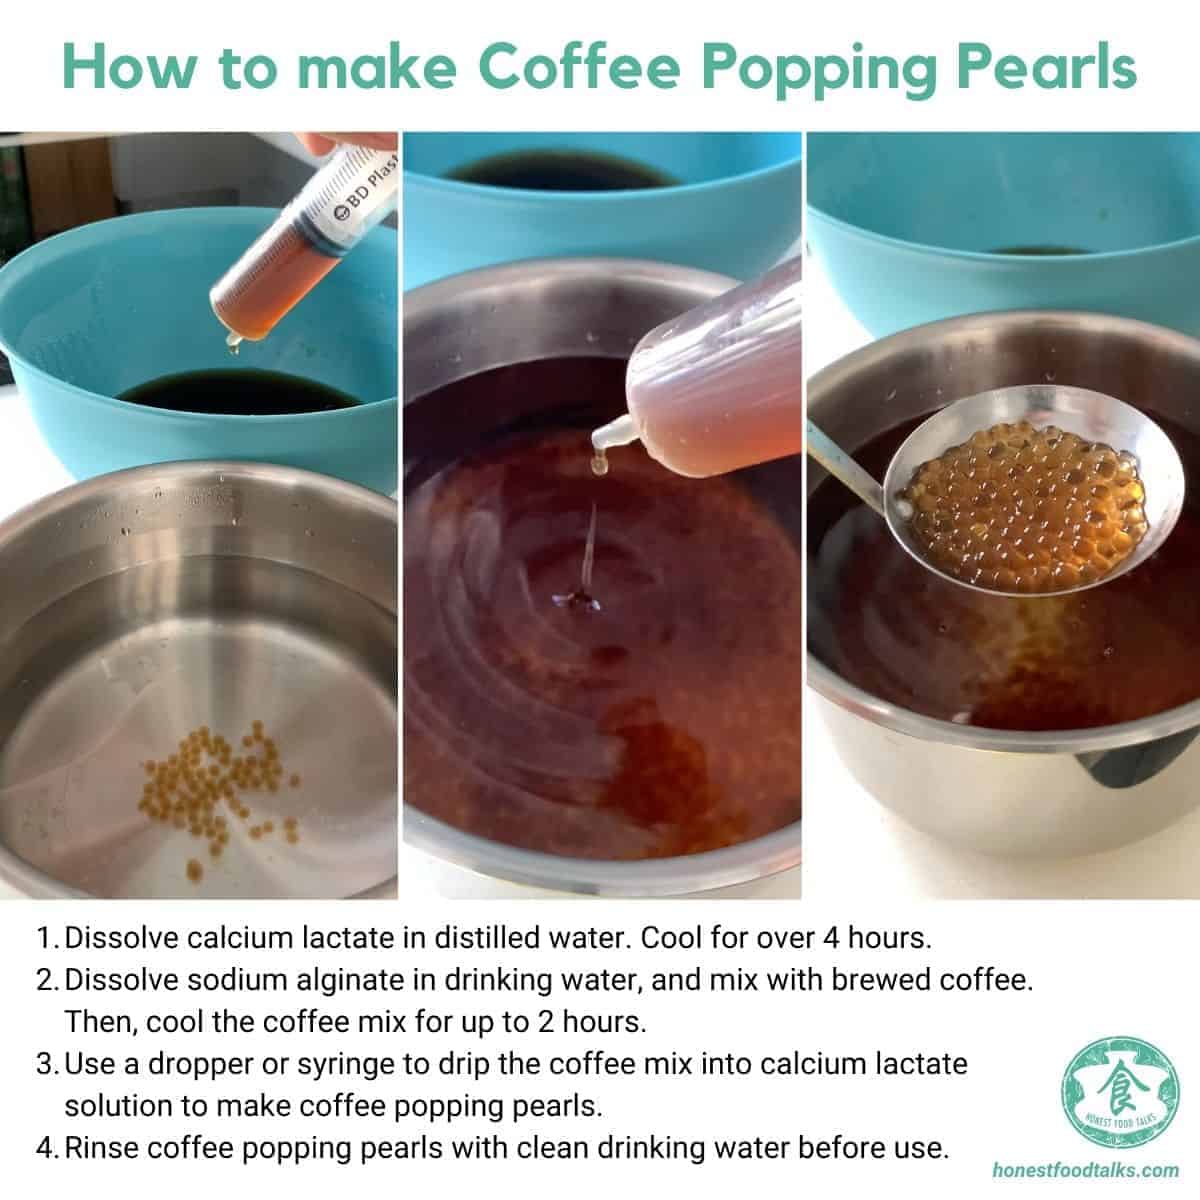 How to make coffee popping pearls